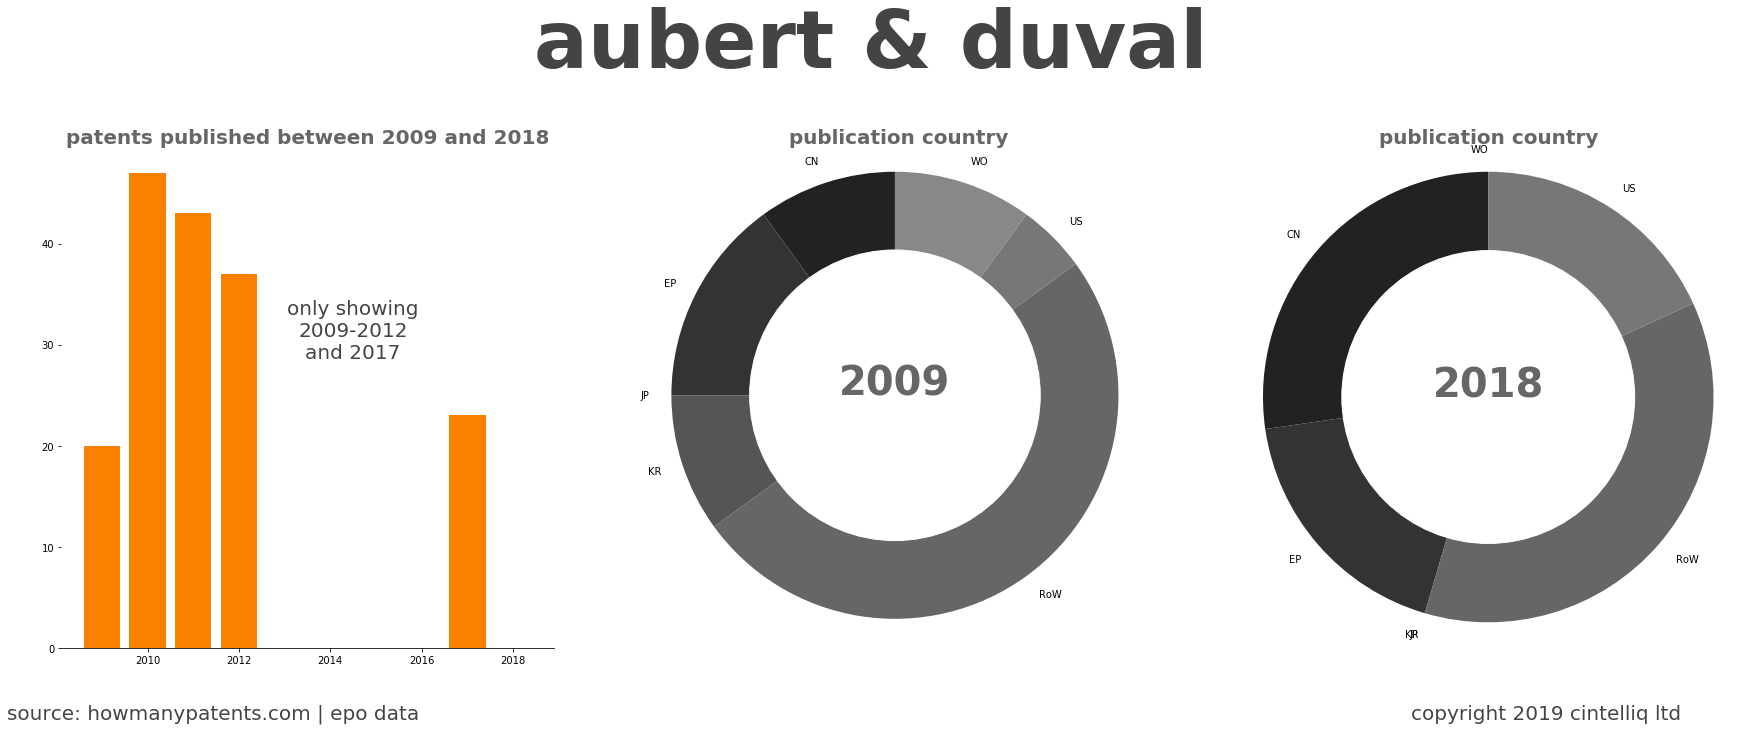 summary of patents for Aubert & Duval